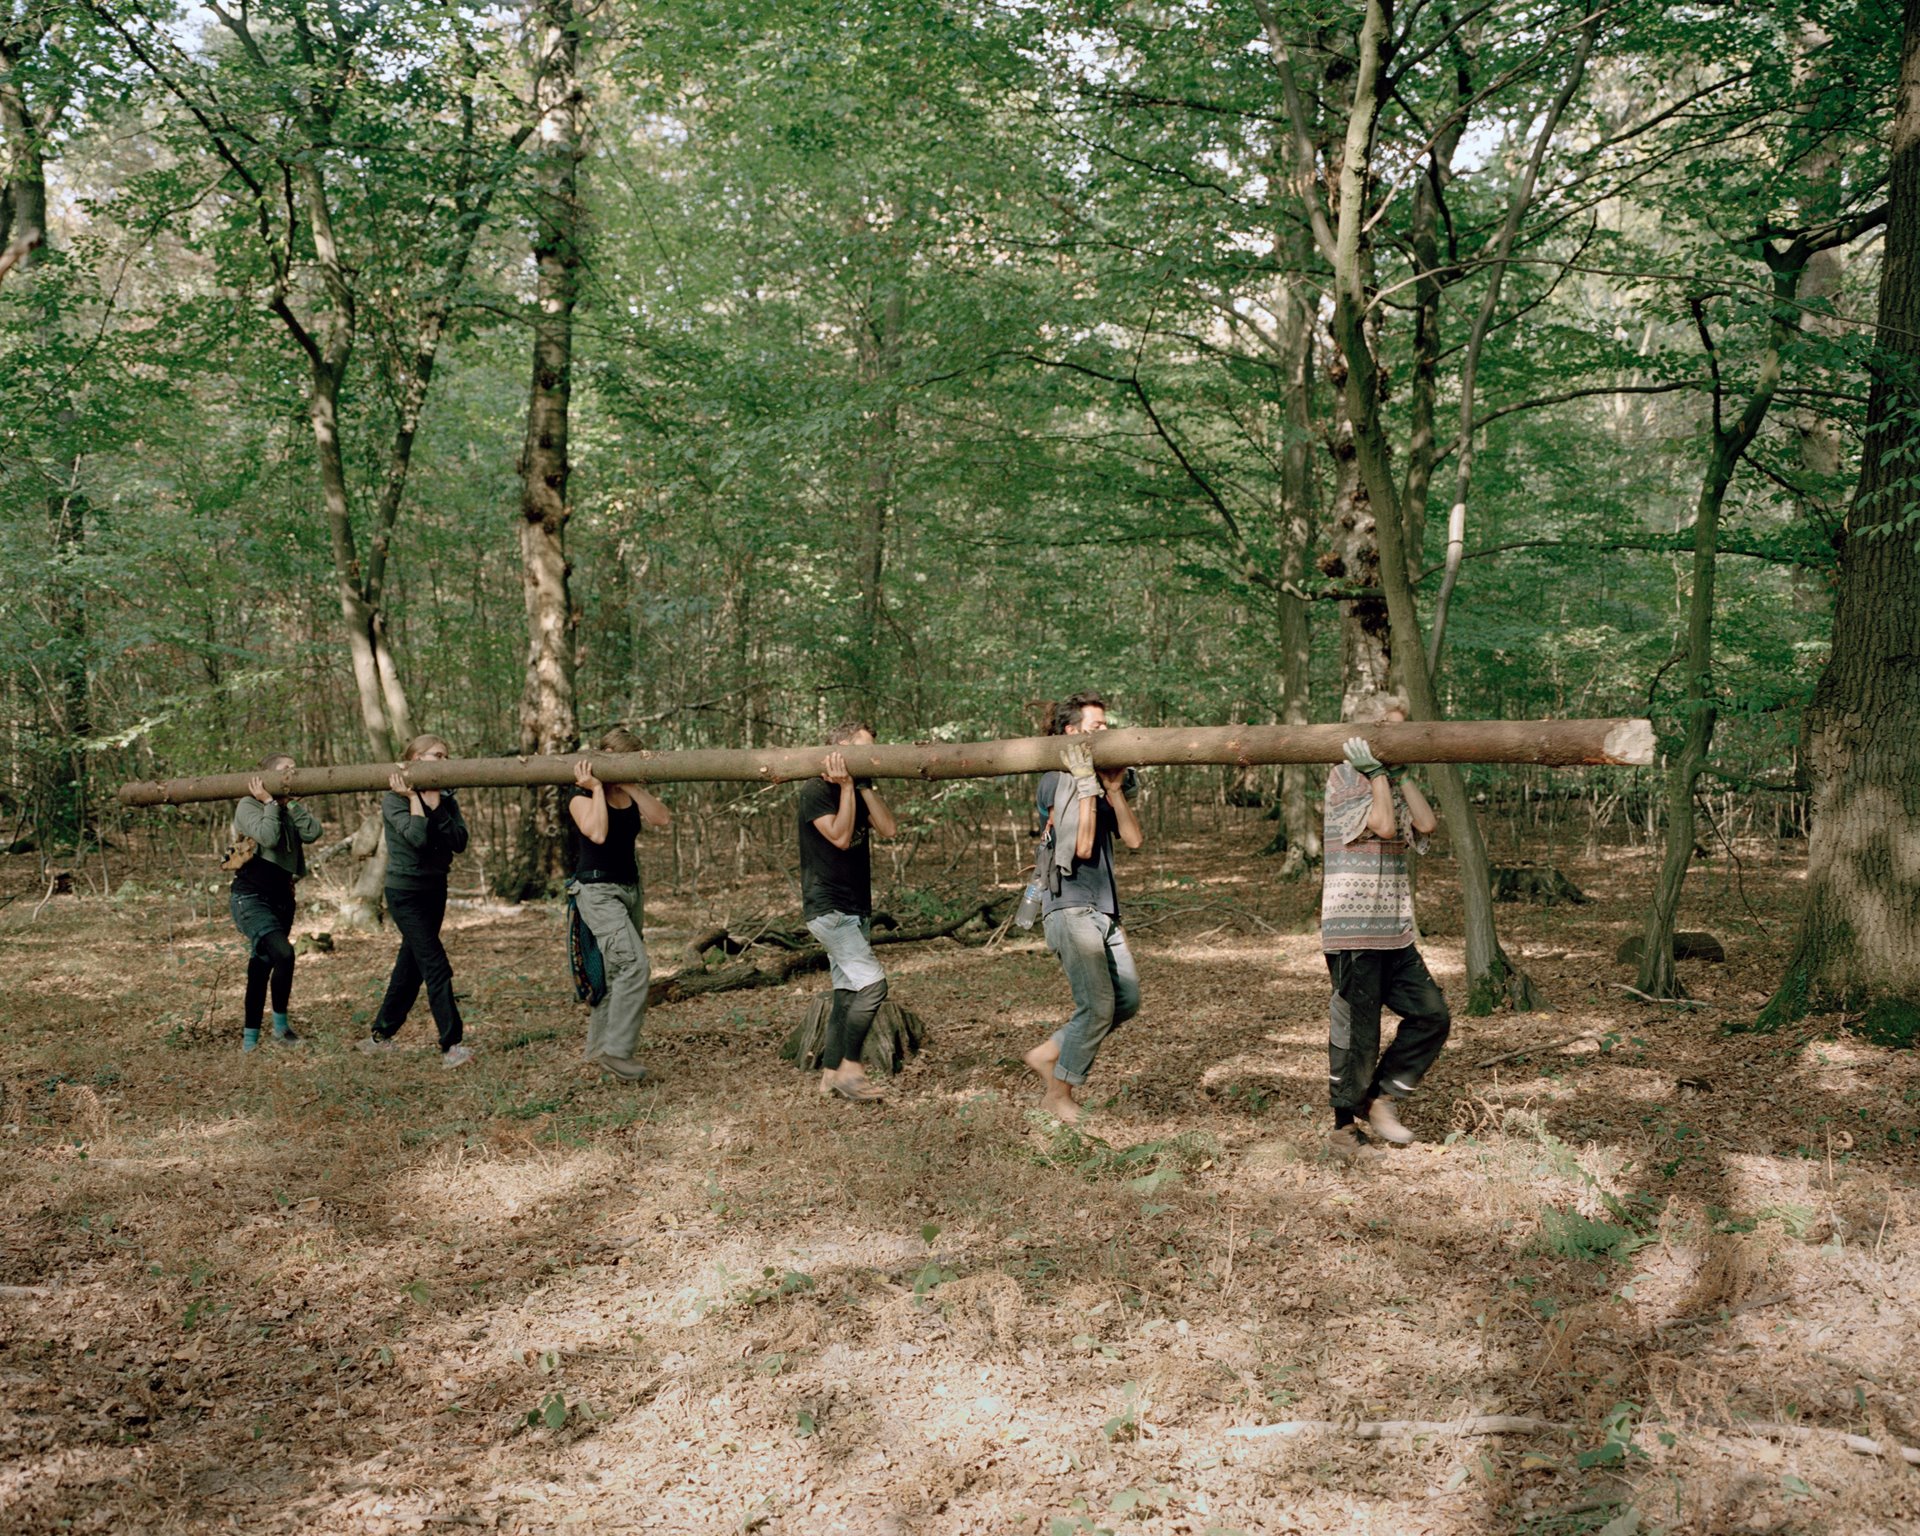 Activists carry a tree trunk through the forest to build a treehouse, in Hambach Forest, near Kerpen, Germany. In a small part of the forest, where a spruce monoculture has been cultivated, activists regularly fell trees for timber.